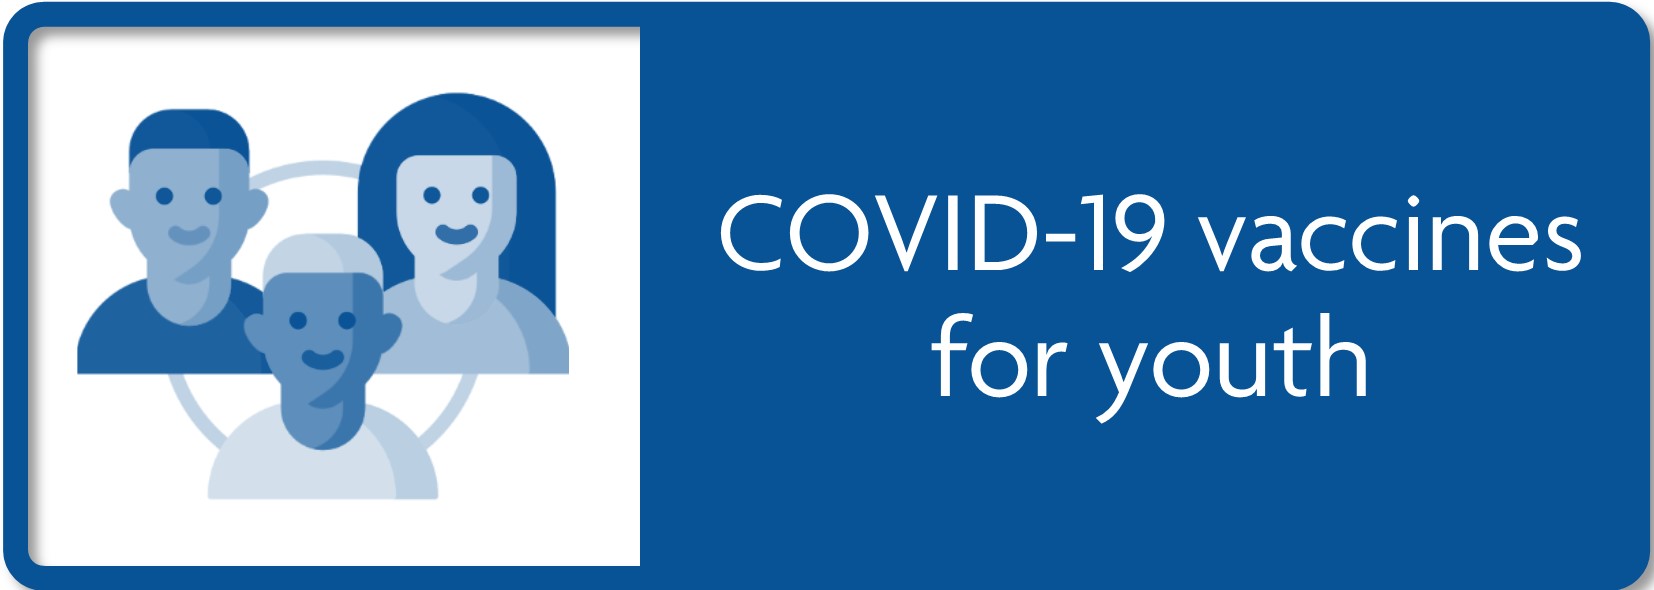 COVID-19 vaccines for youth